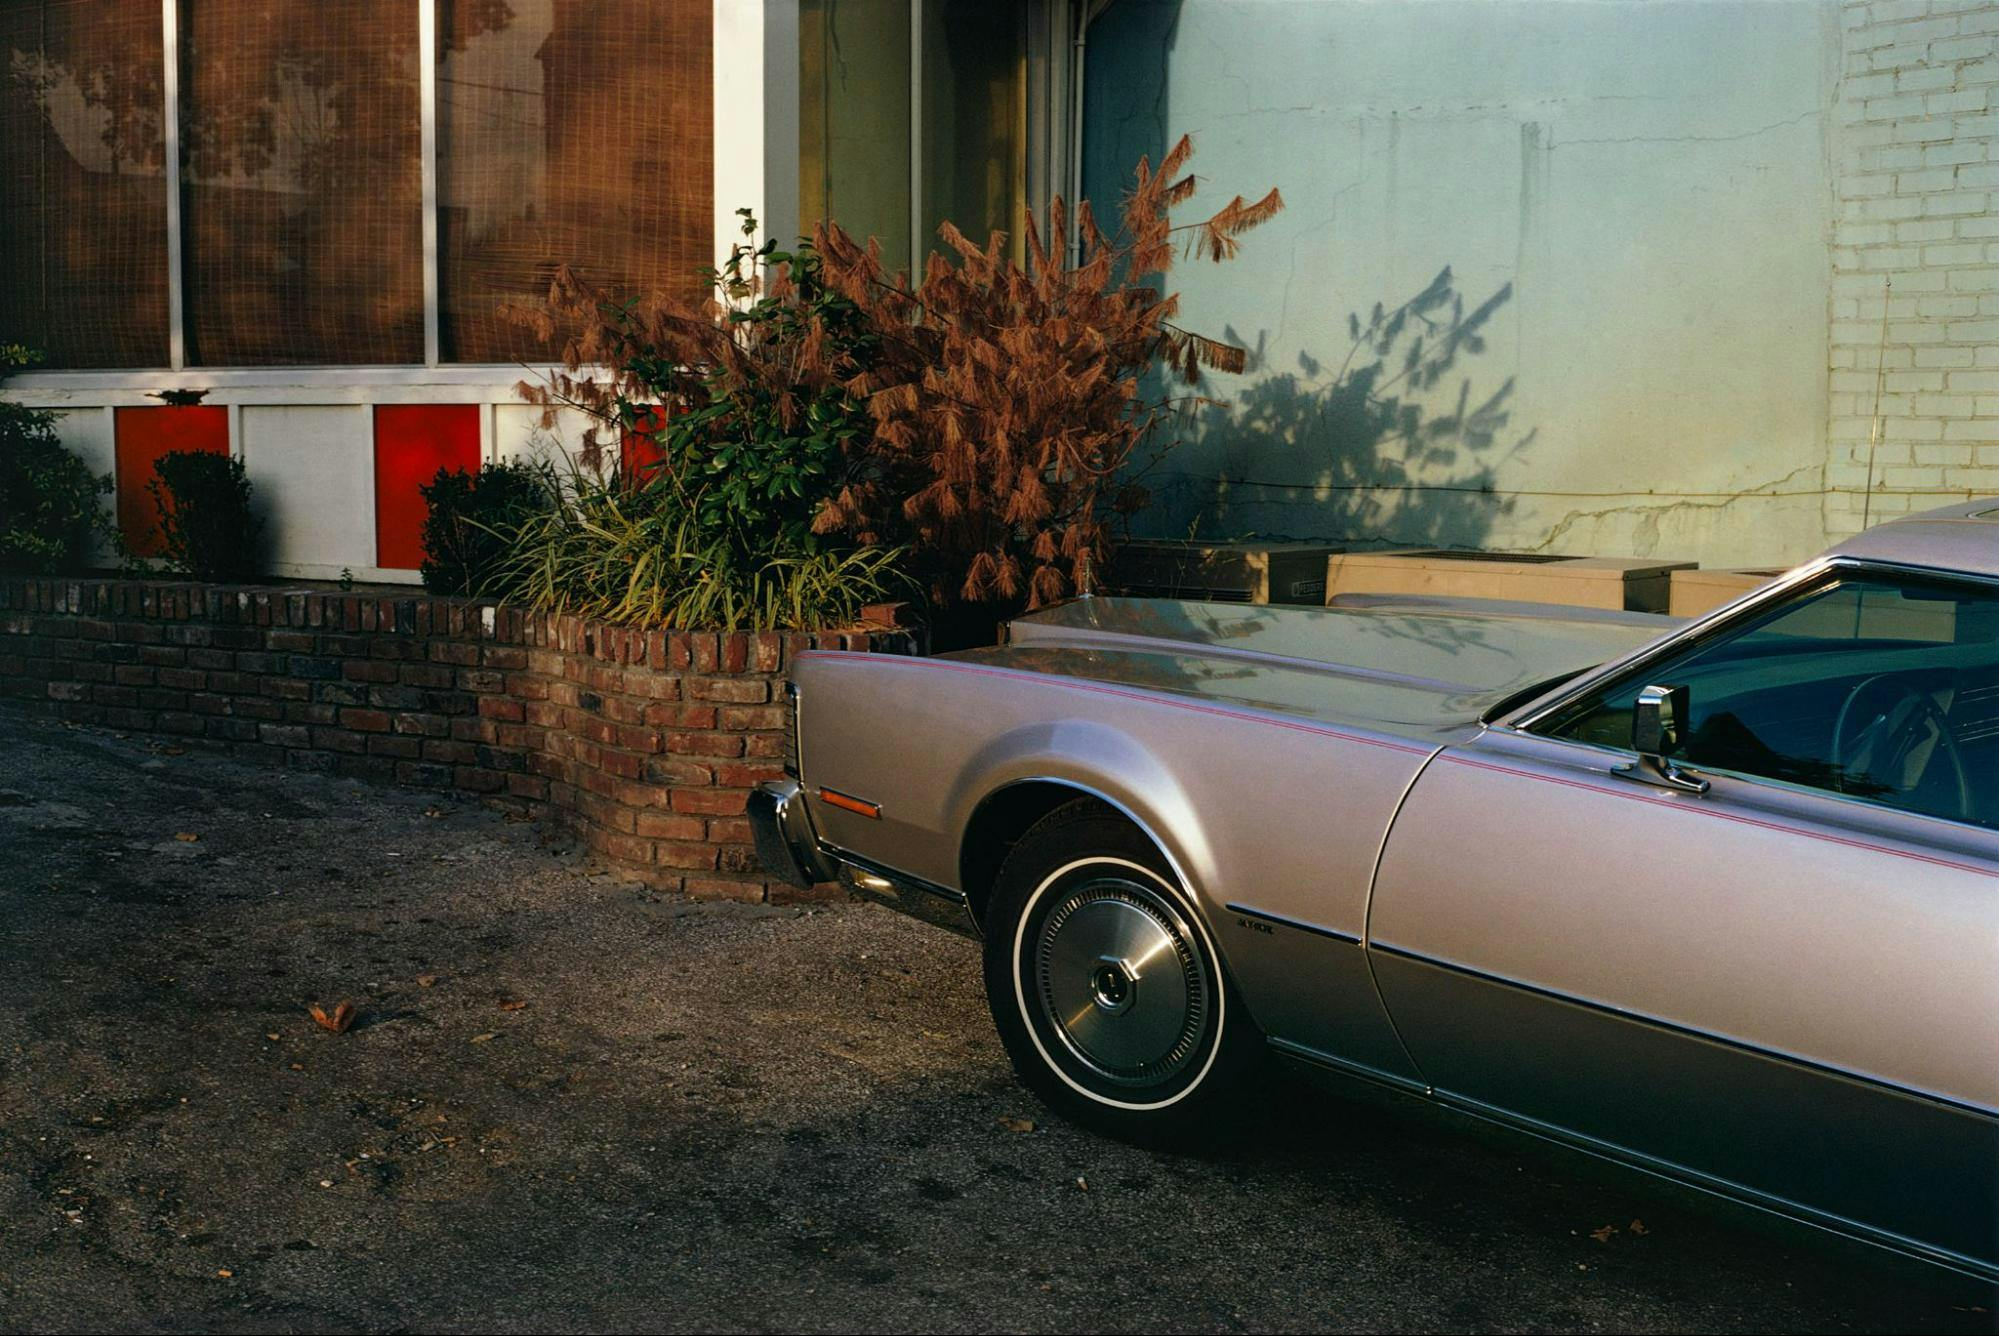 A photograph by William Eggleston, titled "Untitled," circa 1970-1973